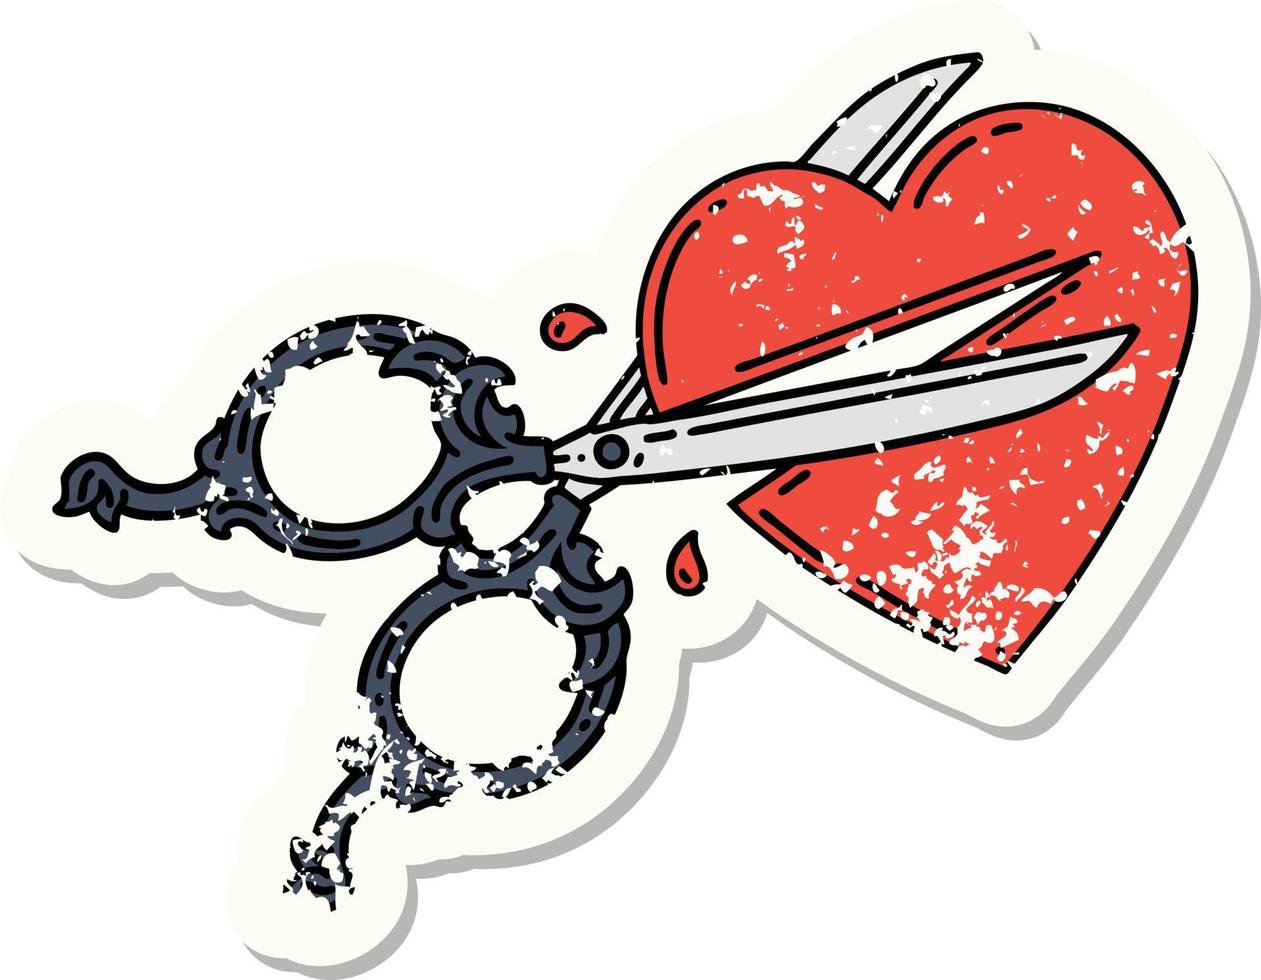 distressed sticker tattoo in traditional style of scissors cutting a heart vector